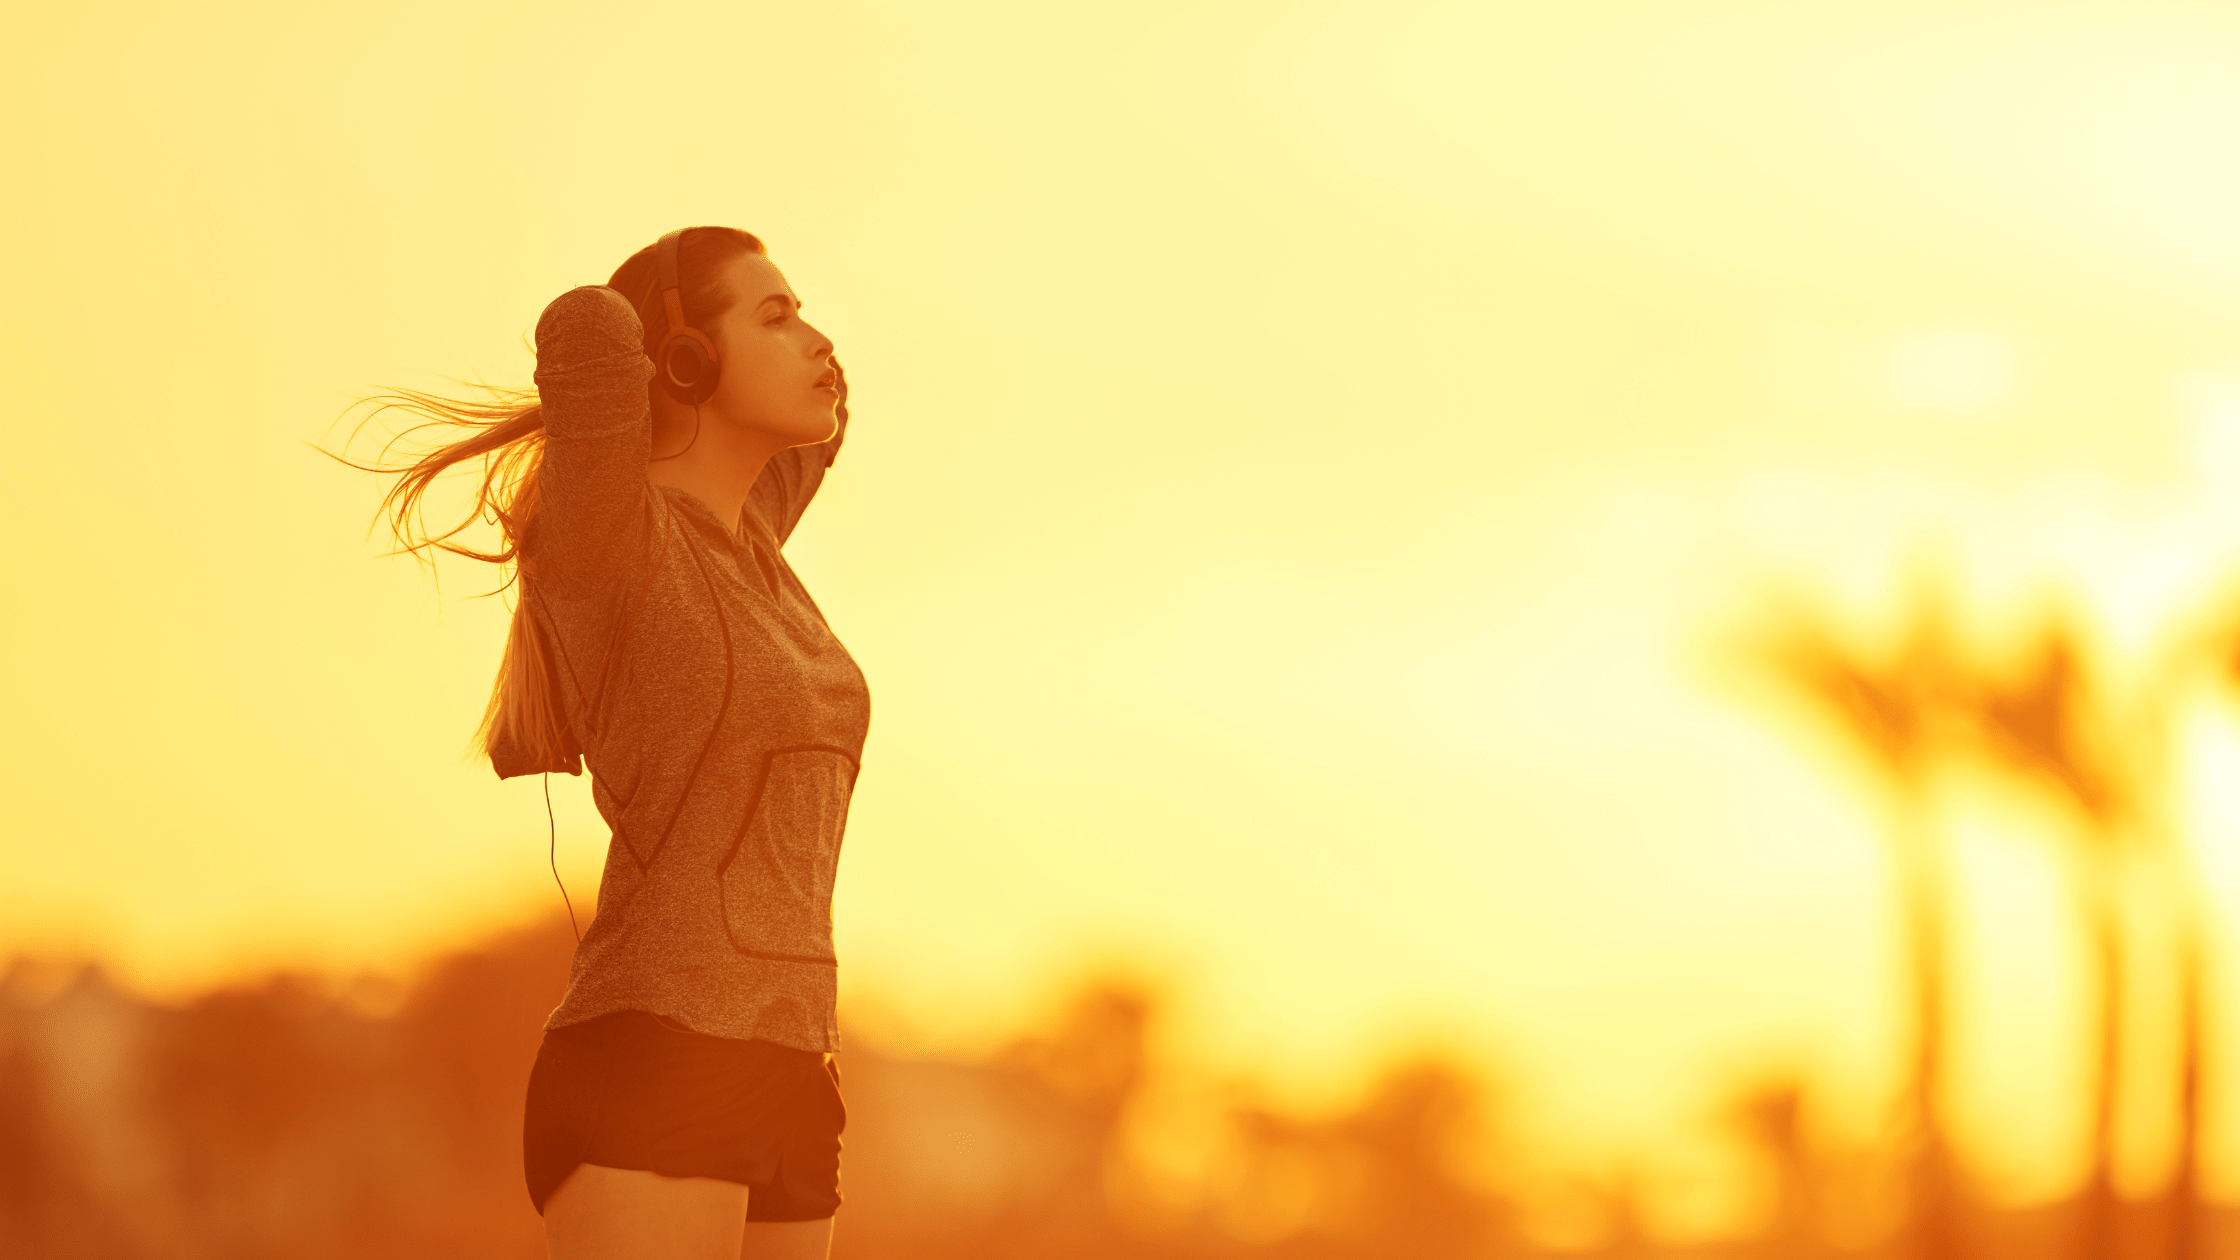 Image of a woman stretching after a run in the evening light of a setting sun - urban setting